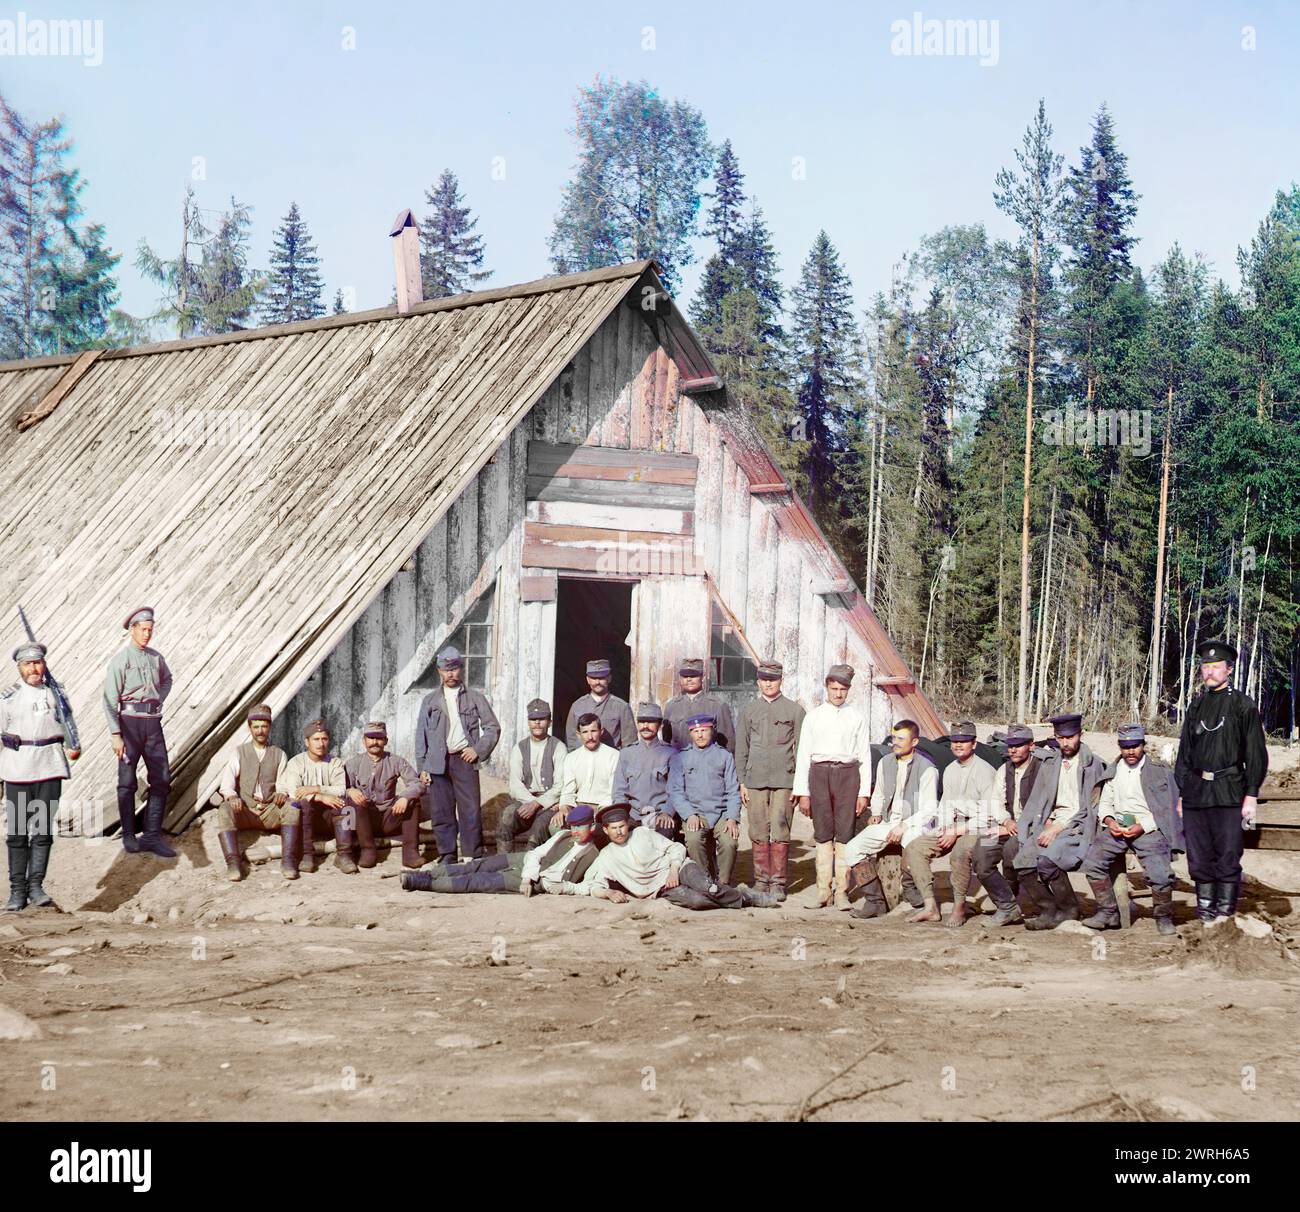 Austrian prisoners of war near a barrack, [near Kiappeselga], 1915. Austro-Hungarian Prisoners of War In the early years of the First World War. The men are probably Poles, Ukrainians, and members of other Slavic nationalities, imprisoned at an unidentified location in the far north of European Russia near the White Sea. Stock Photo